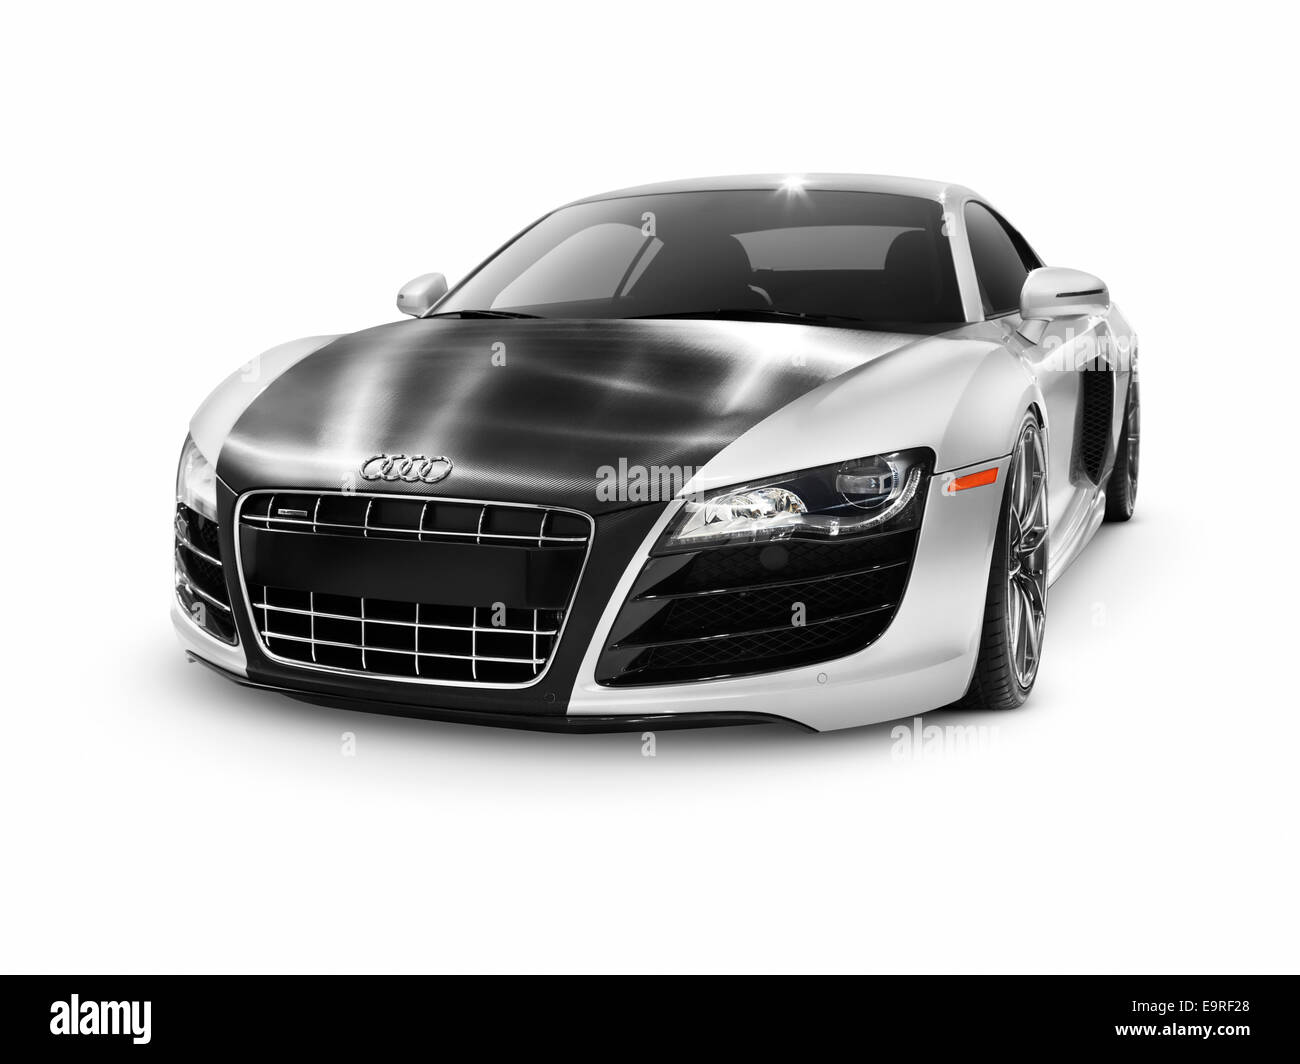 License and prints at MaximImages.com - Audi luxury car, automotive stock photo. Stock Photo